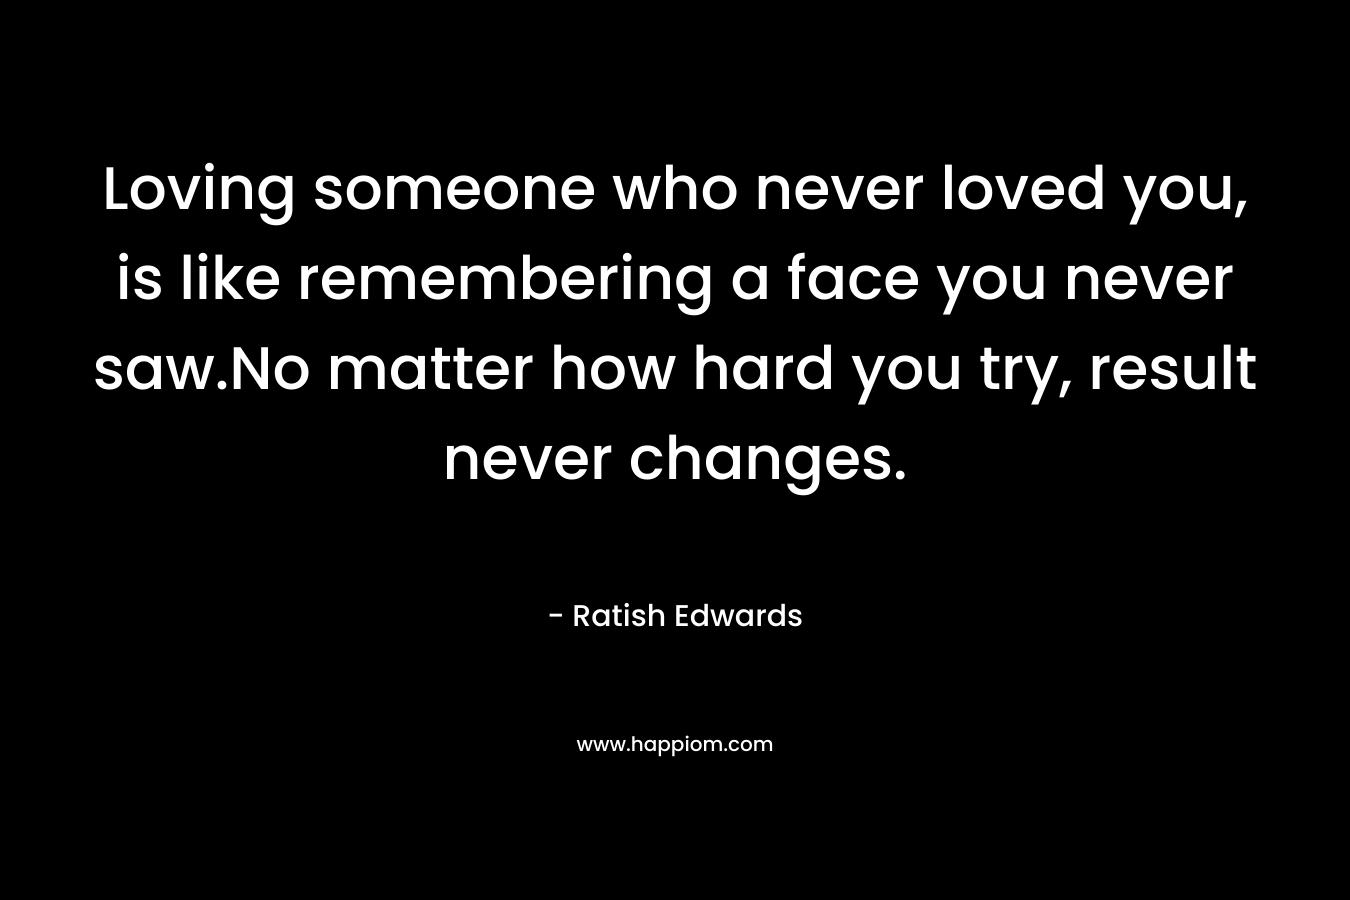 Loving someone who never loved you, is like remembering a face you never saw.No matter how hard you try, result never changes.